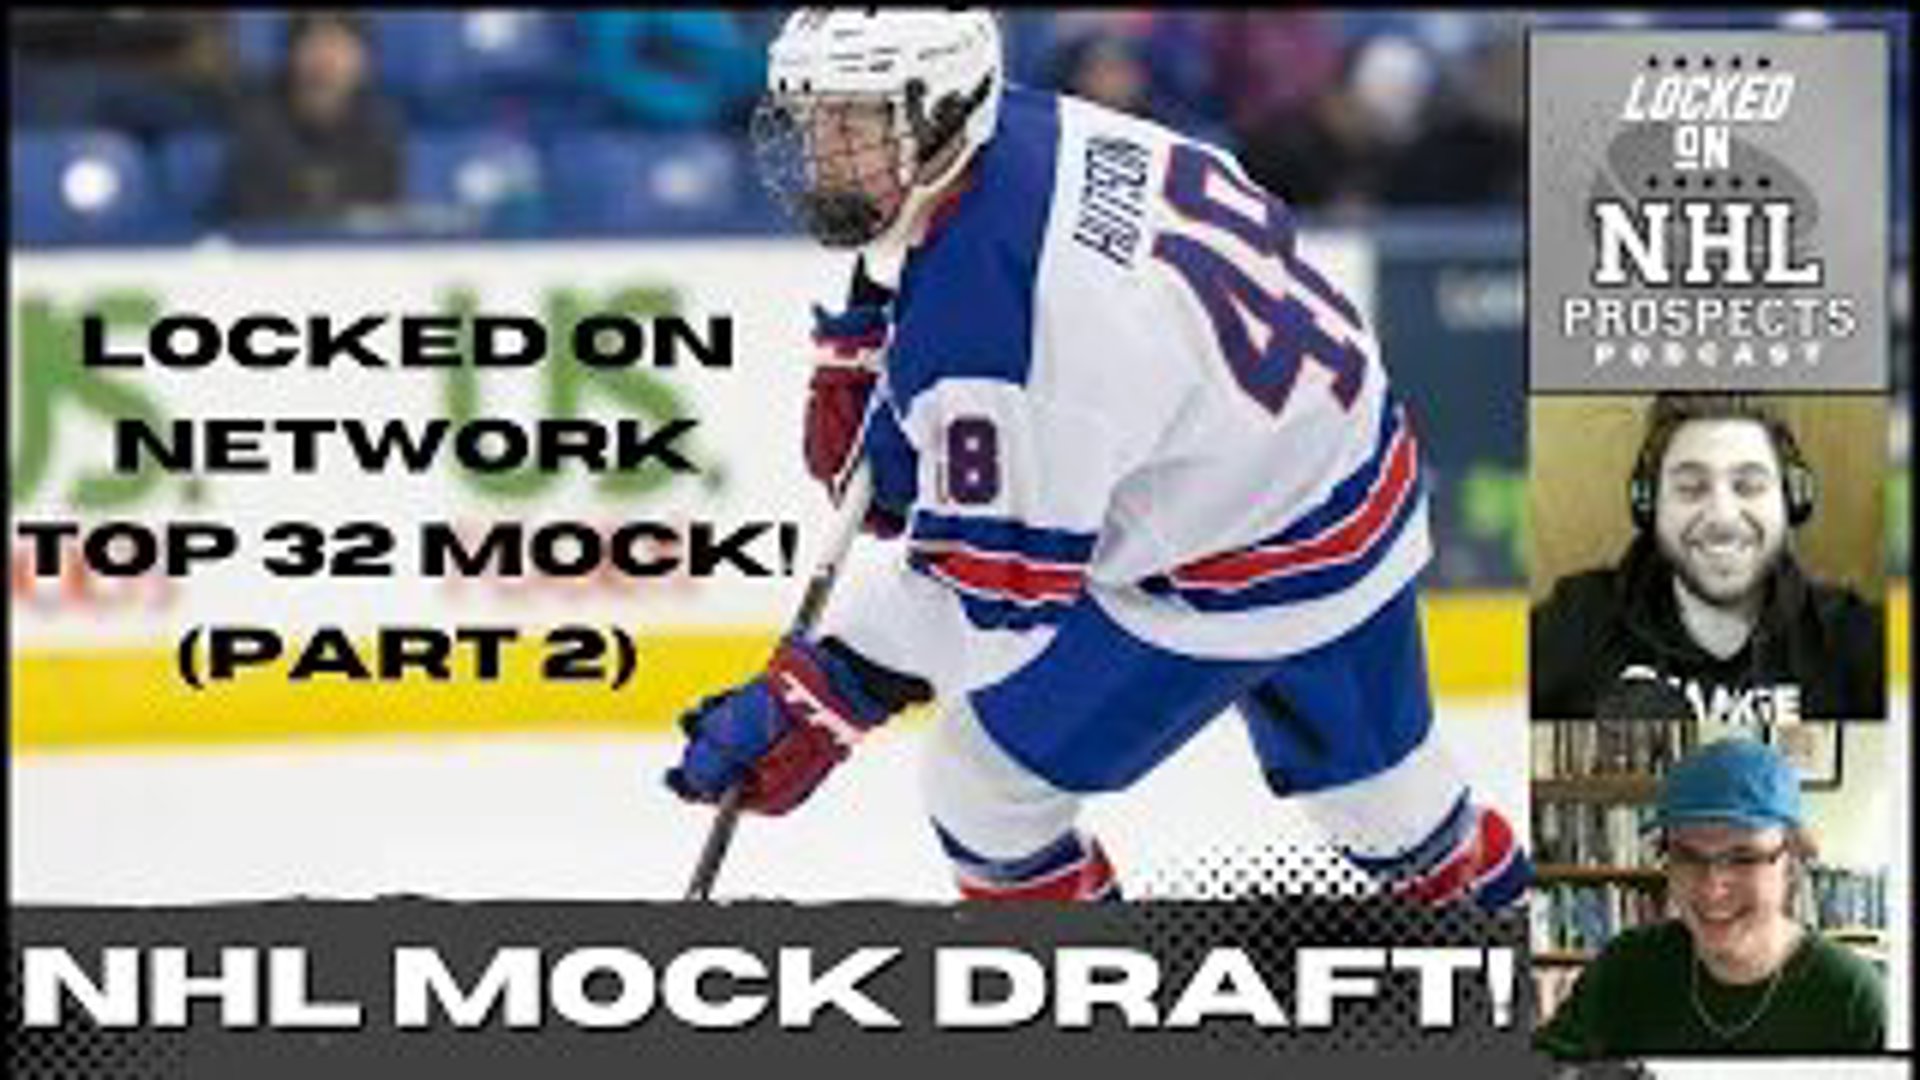 In this episode, our scouts continue breaking down the Top 32 Mock Draft put together by the 32 NHL Team Channels at the Locked On NHL Network!